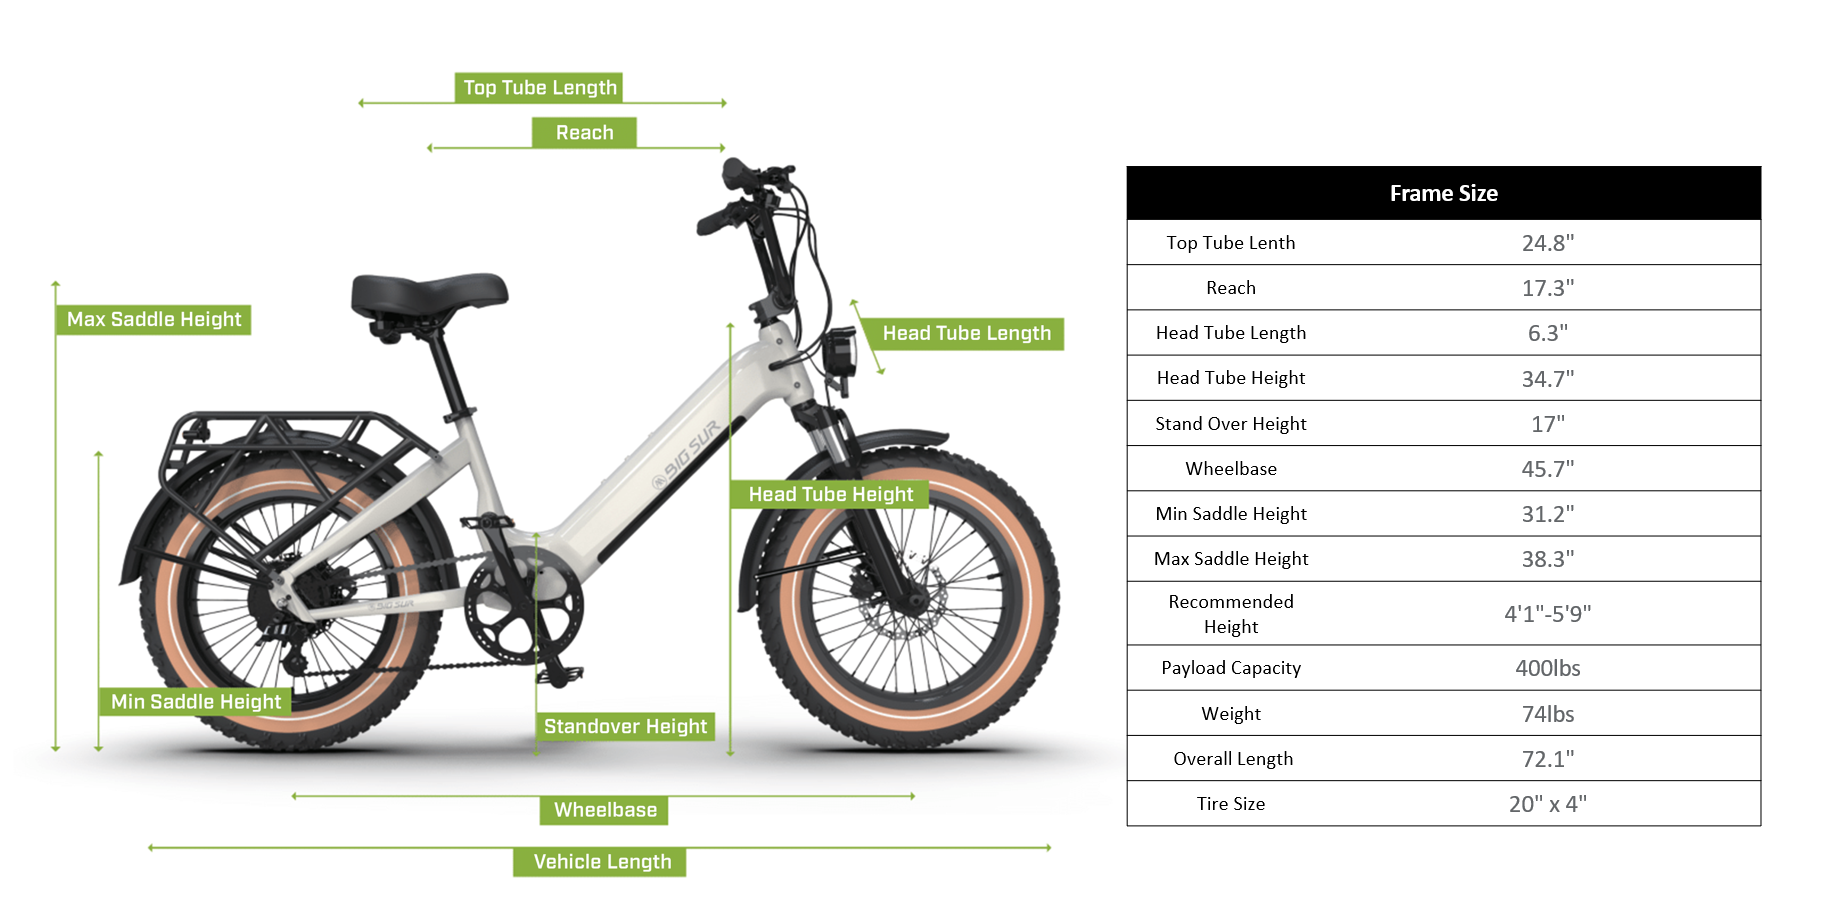 A compact powerhouse, the AIMA - Big Sur Sport folding electric bike features labeled specifications such as tube lengths, saddle height, standover height, and wheel size. A chart on the right offers detailed frame size information.